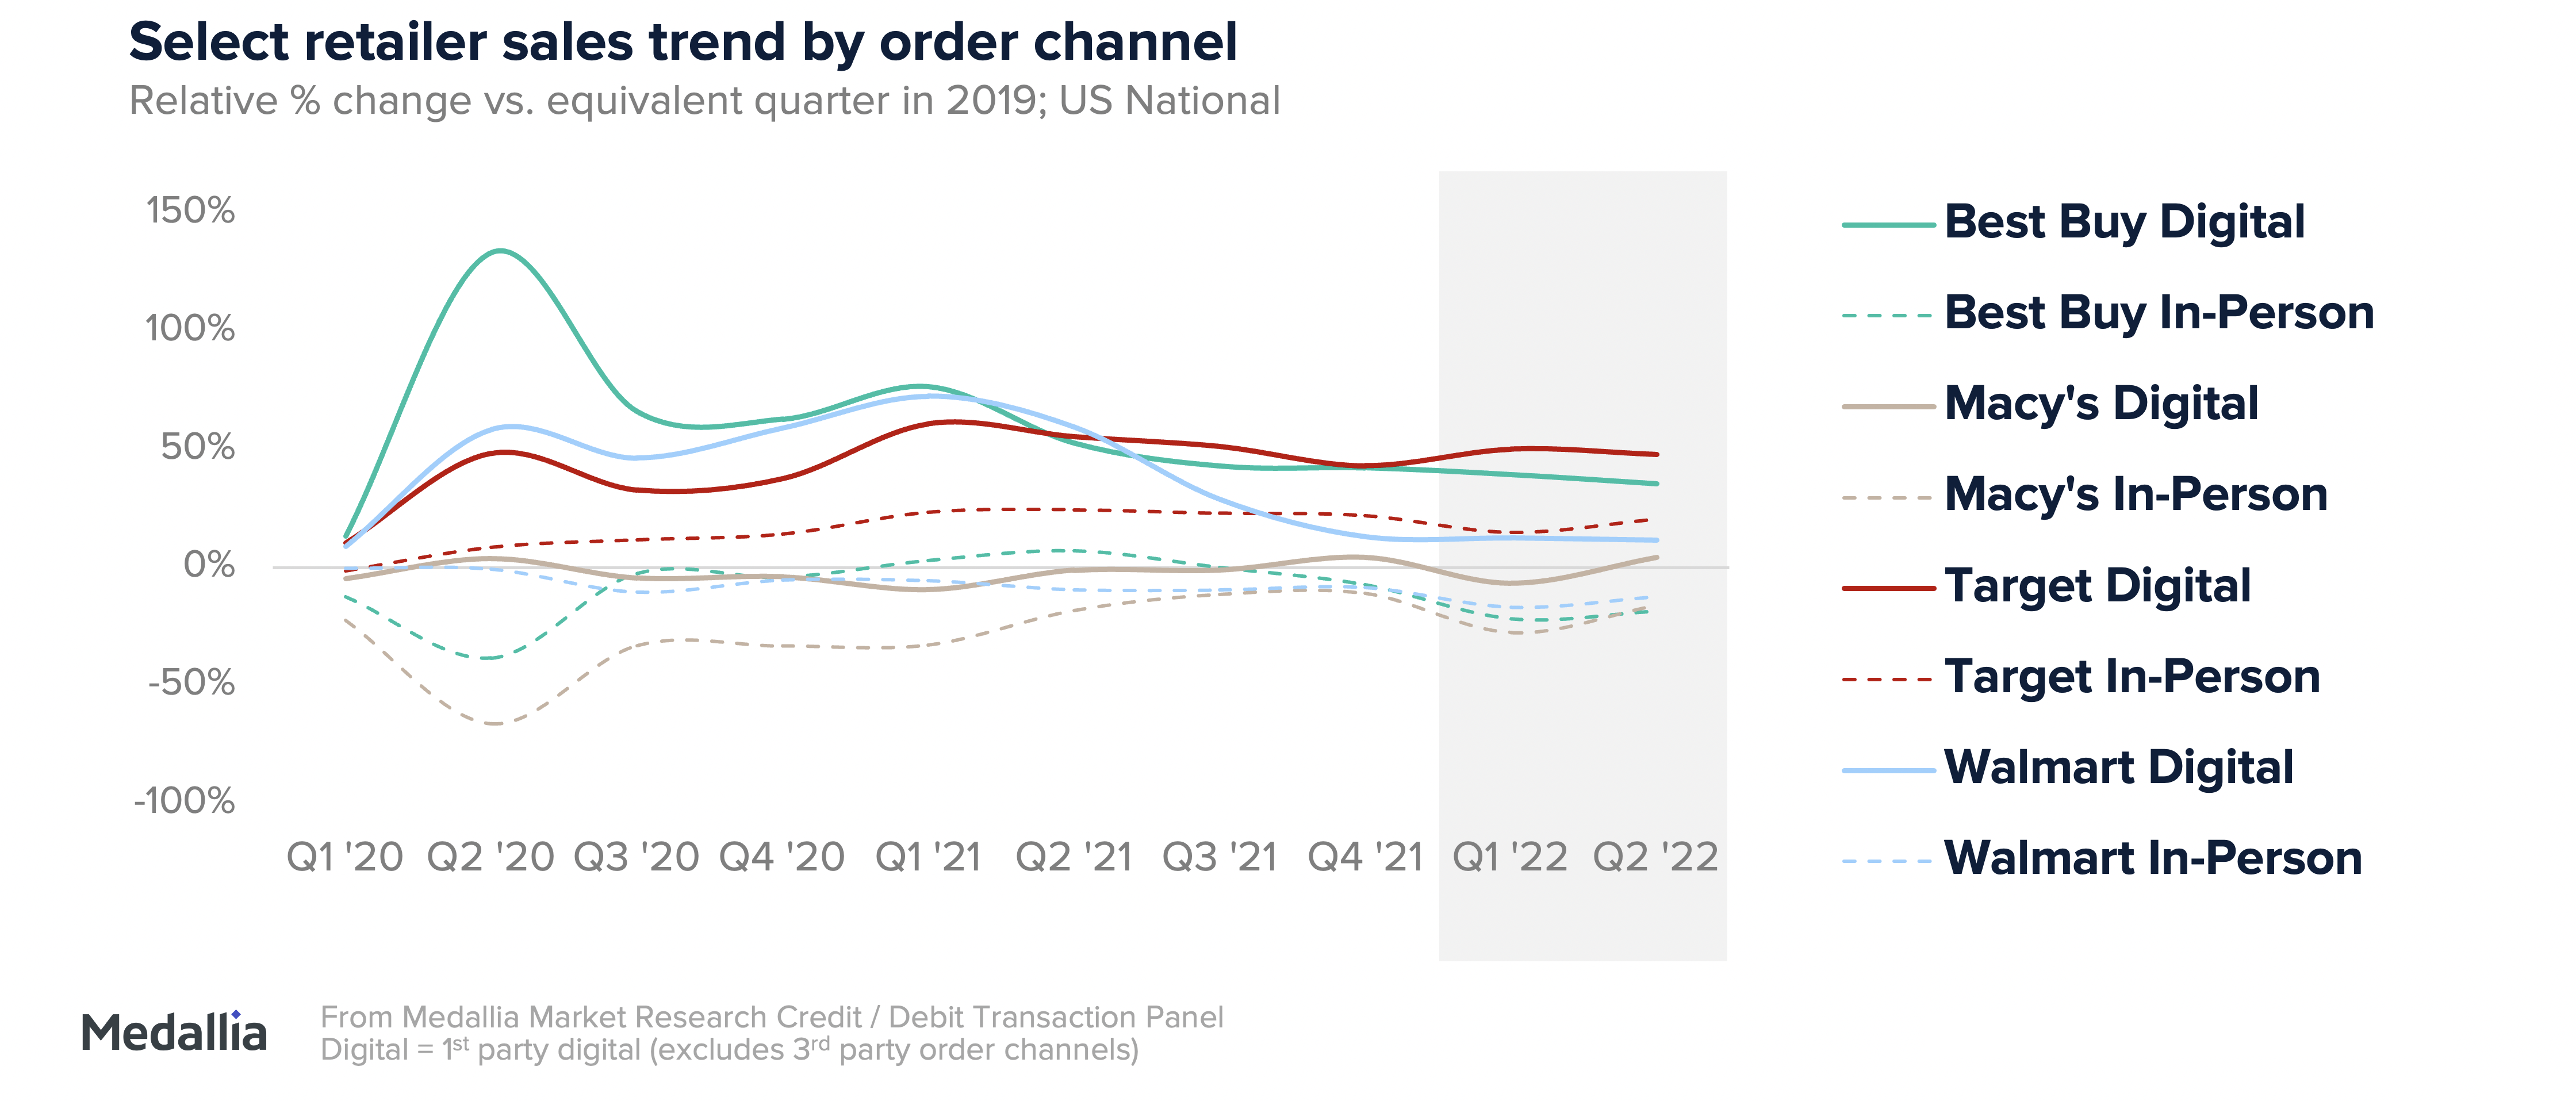 Select retailer sales trend by order channel. Between Best Buy, Macy’s, and Target, spending has started to even out since 2020.